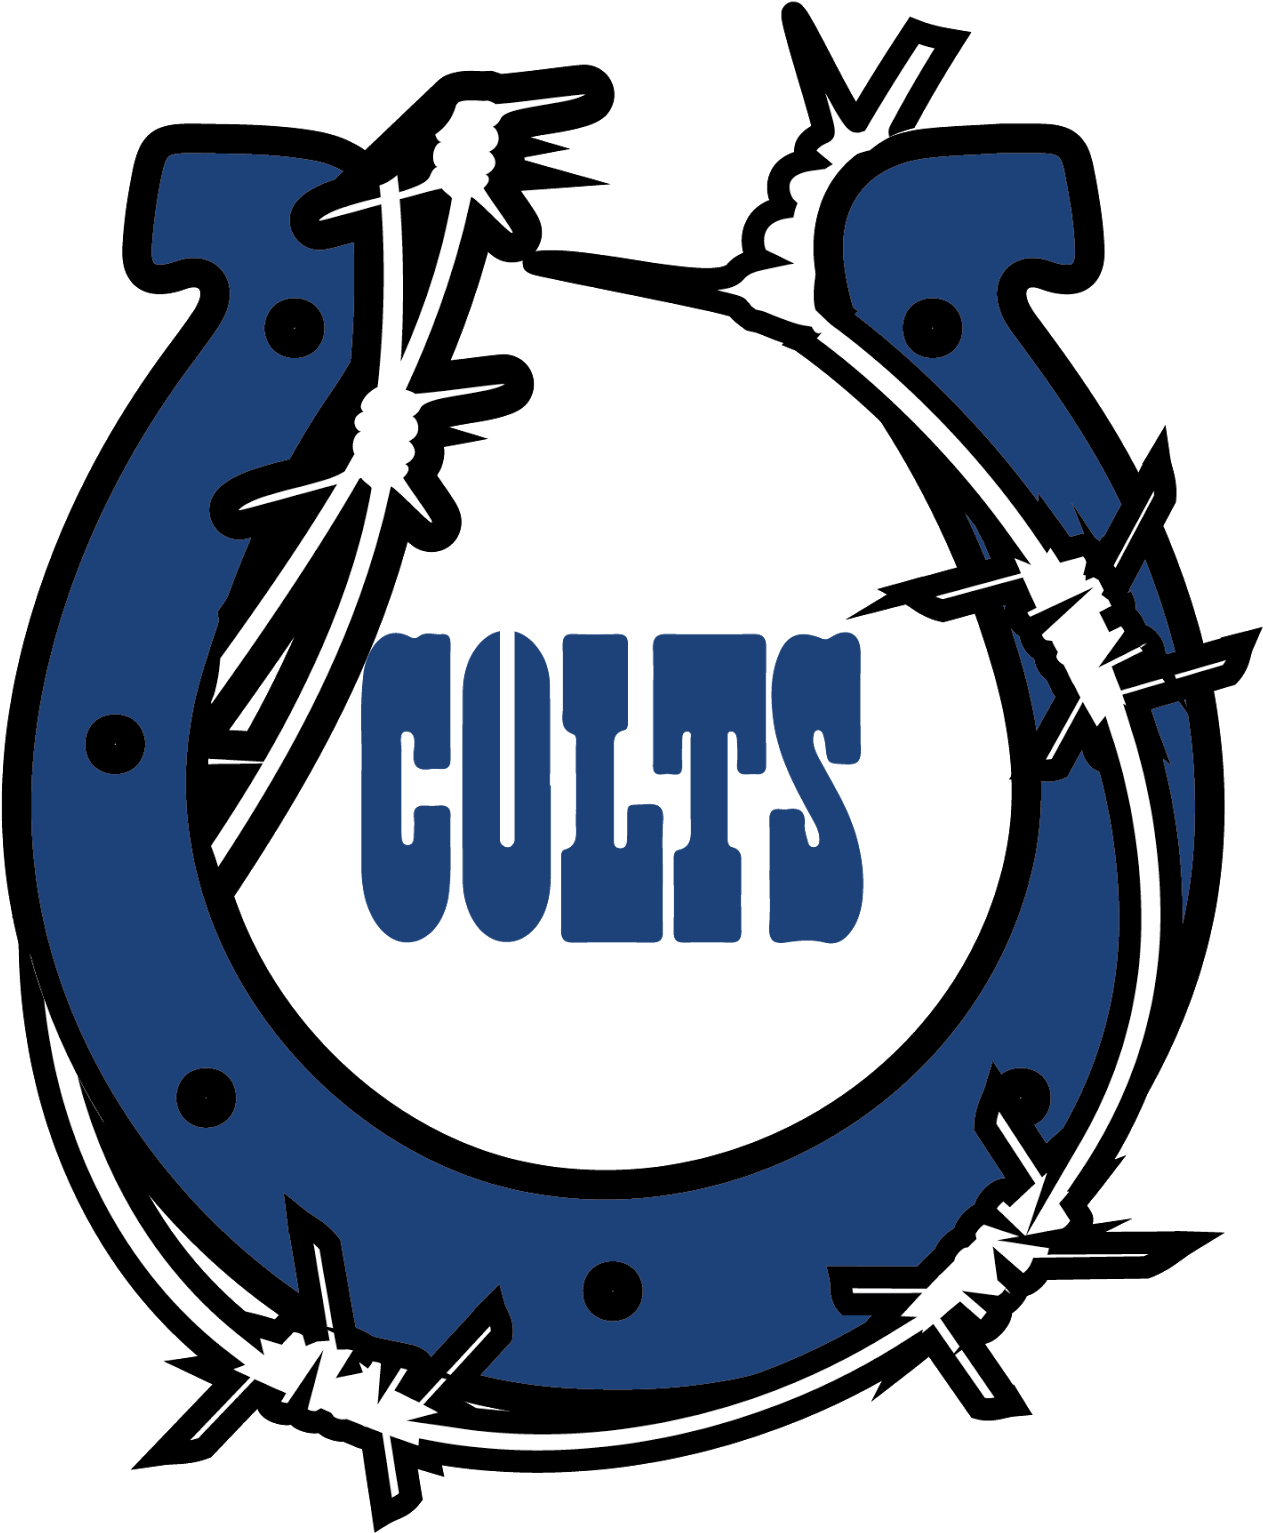 Awesome Indianapolis Colts Logo Clip Art Medium Size - Indianapolis Colts 2014 Logo (1600x1600)